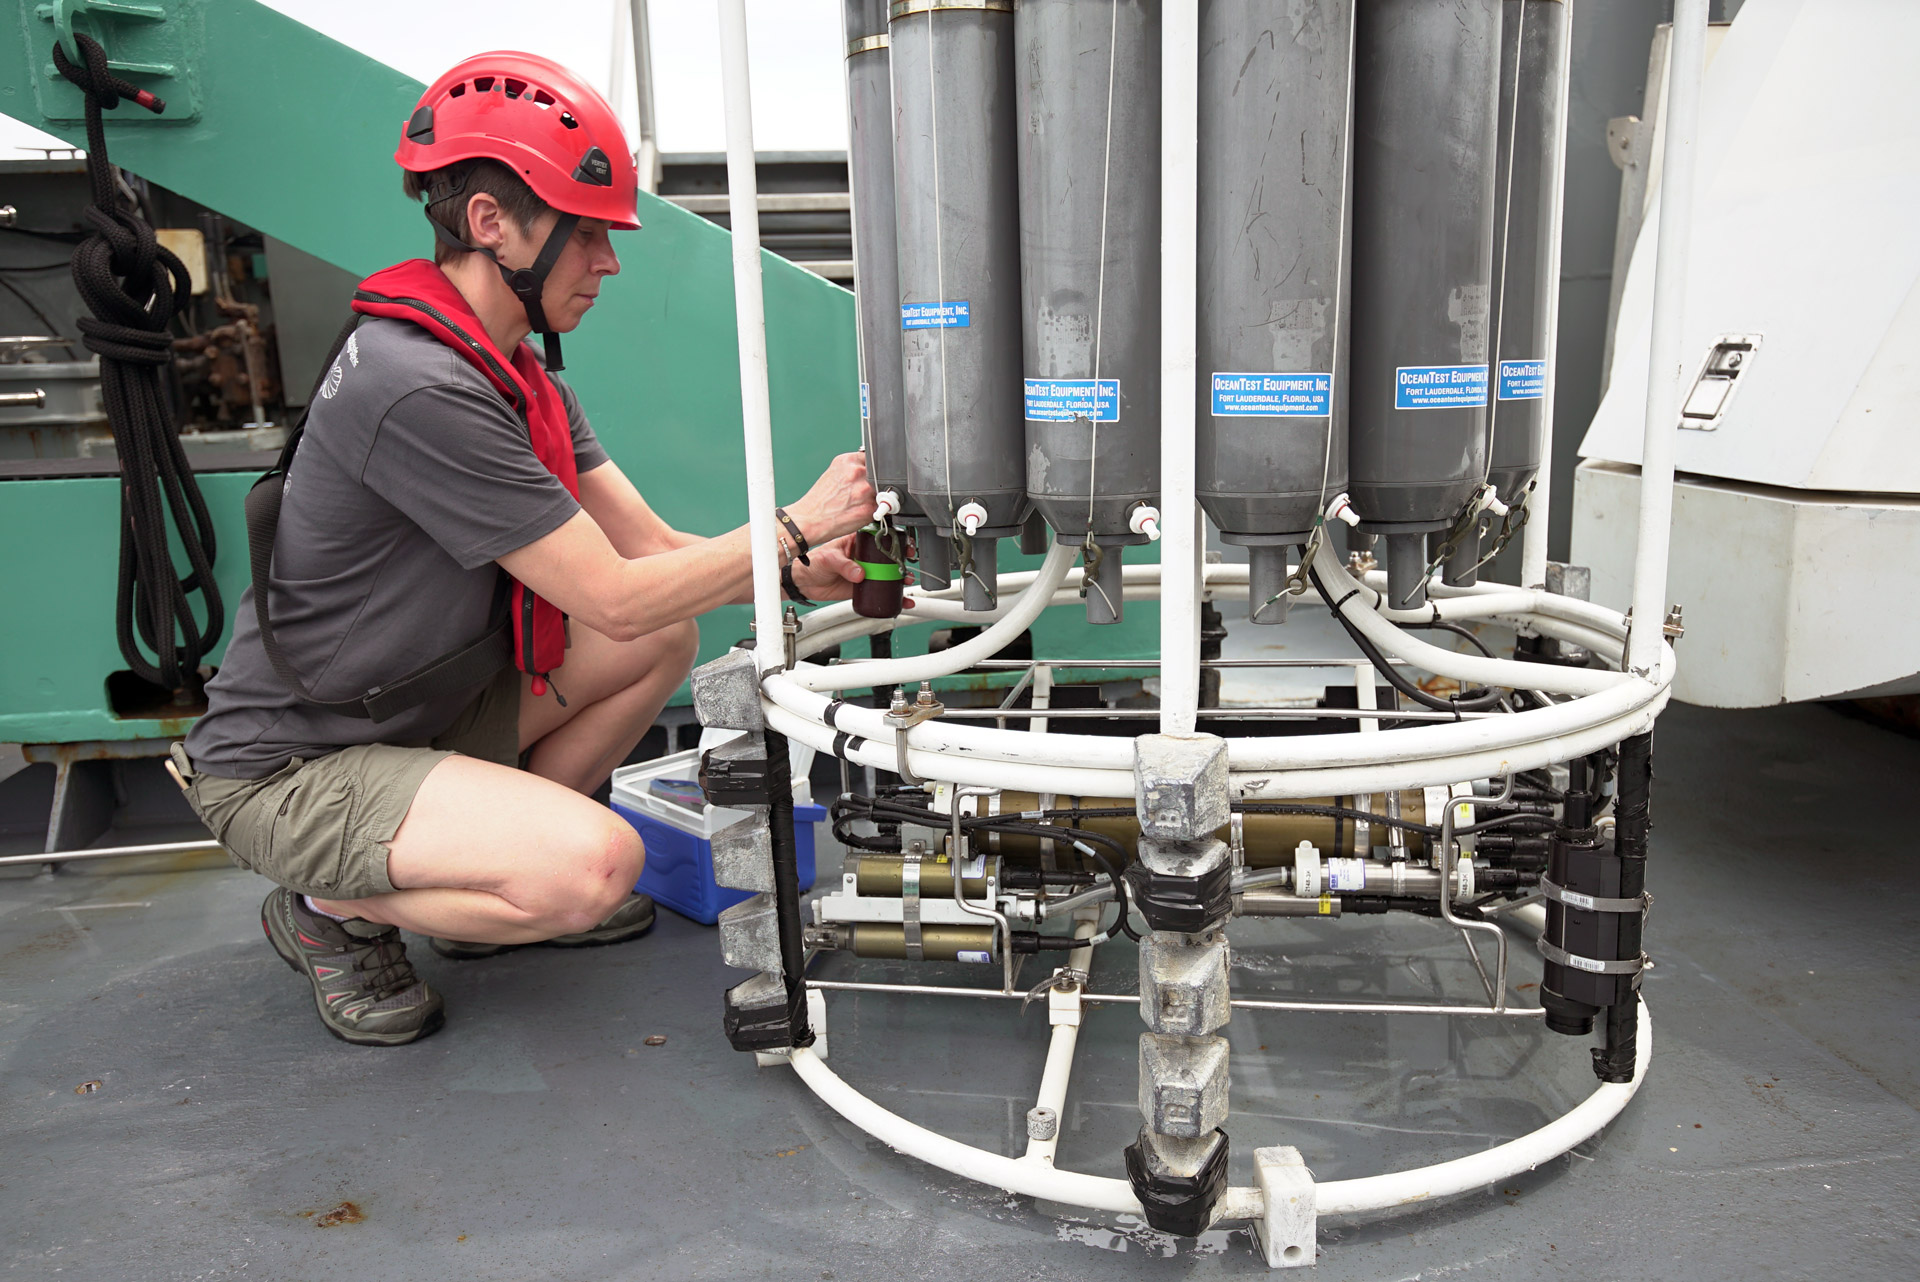 scientist takes water samples from a CTD